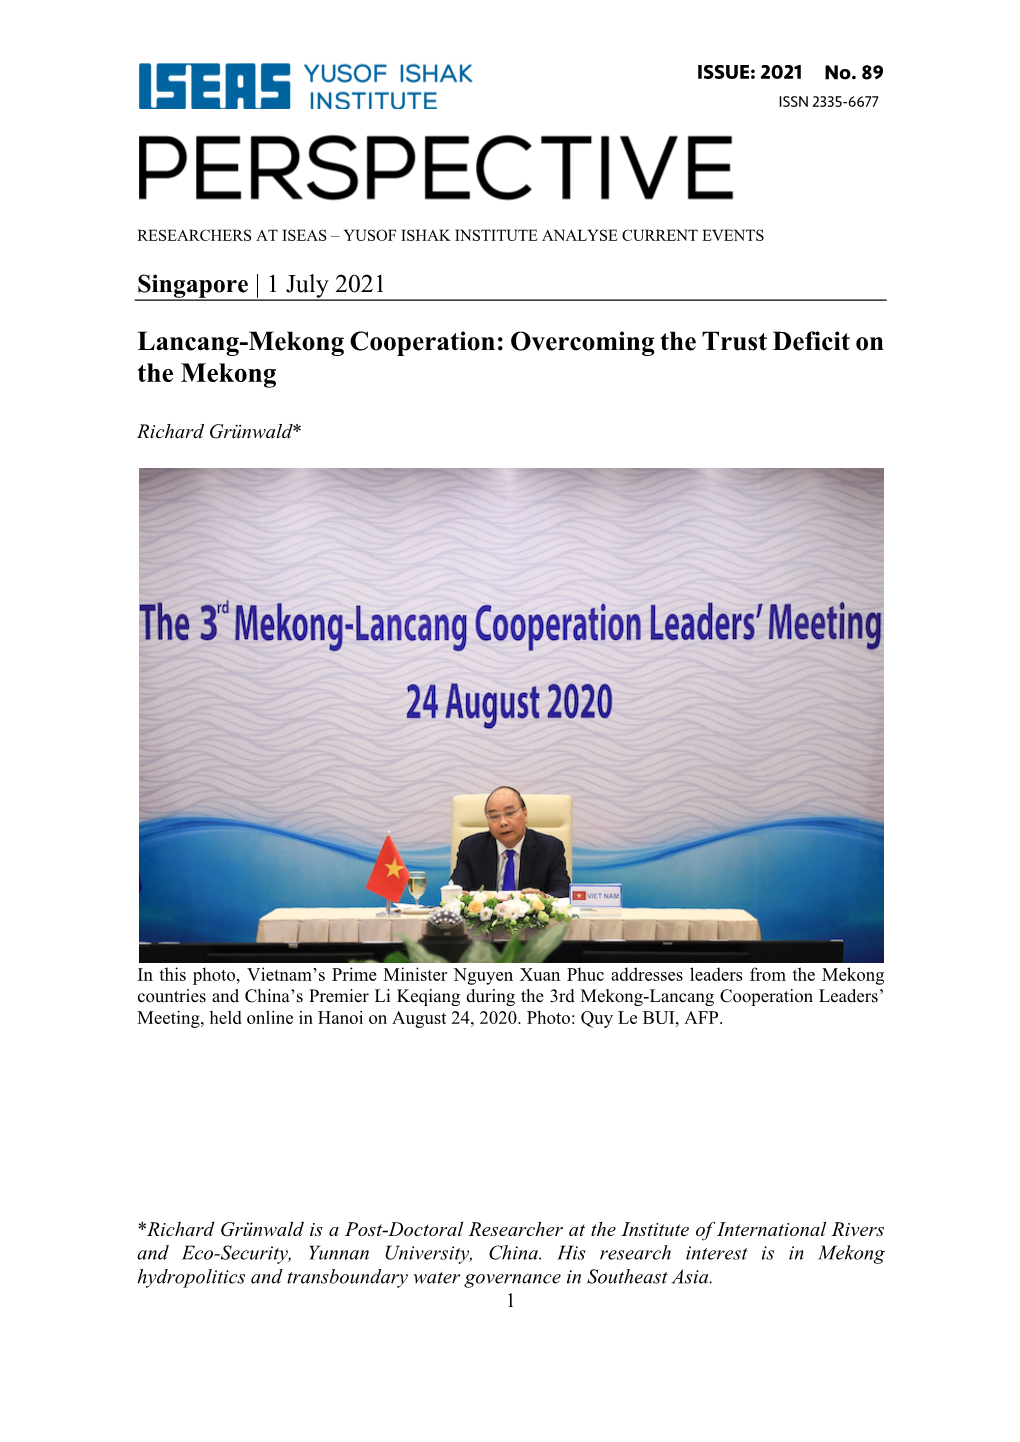 Lancang-Mekong Cooperation: Overcoming the Trust Deficit on the Mekong